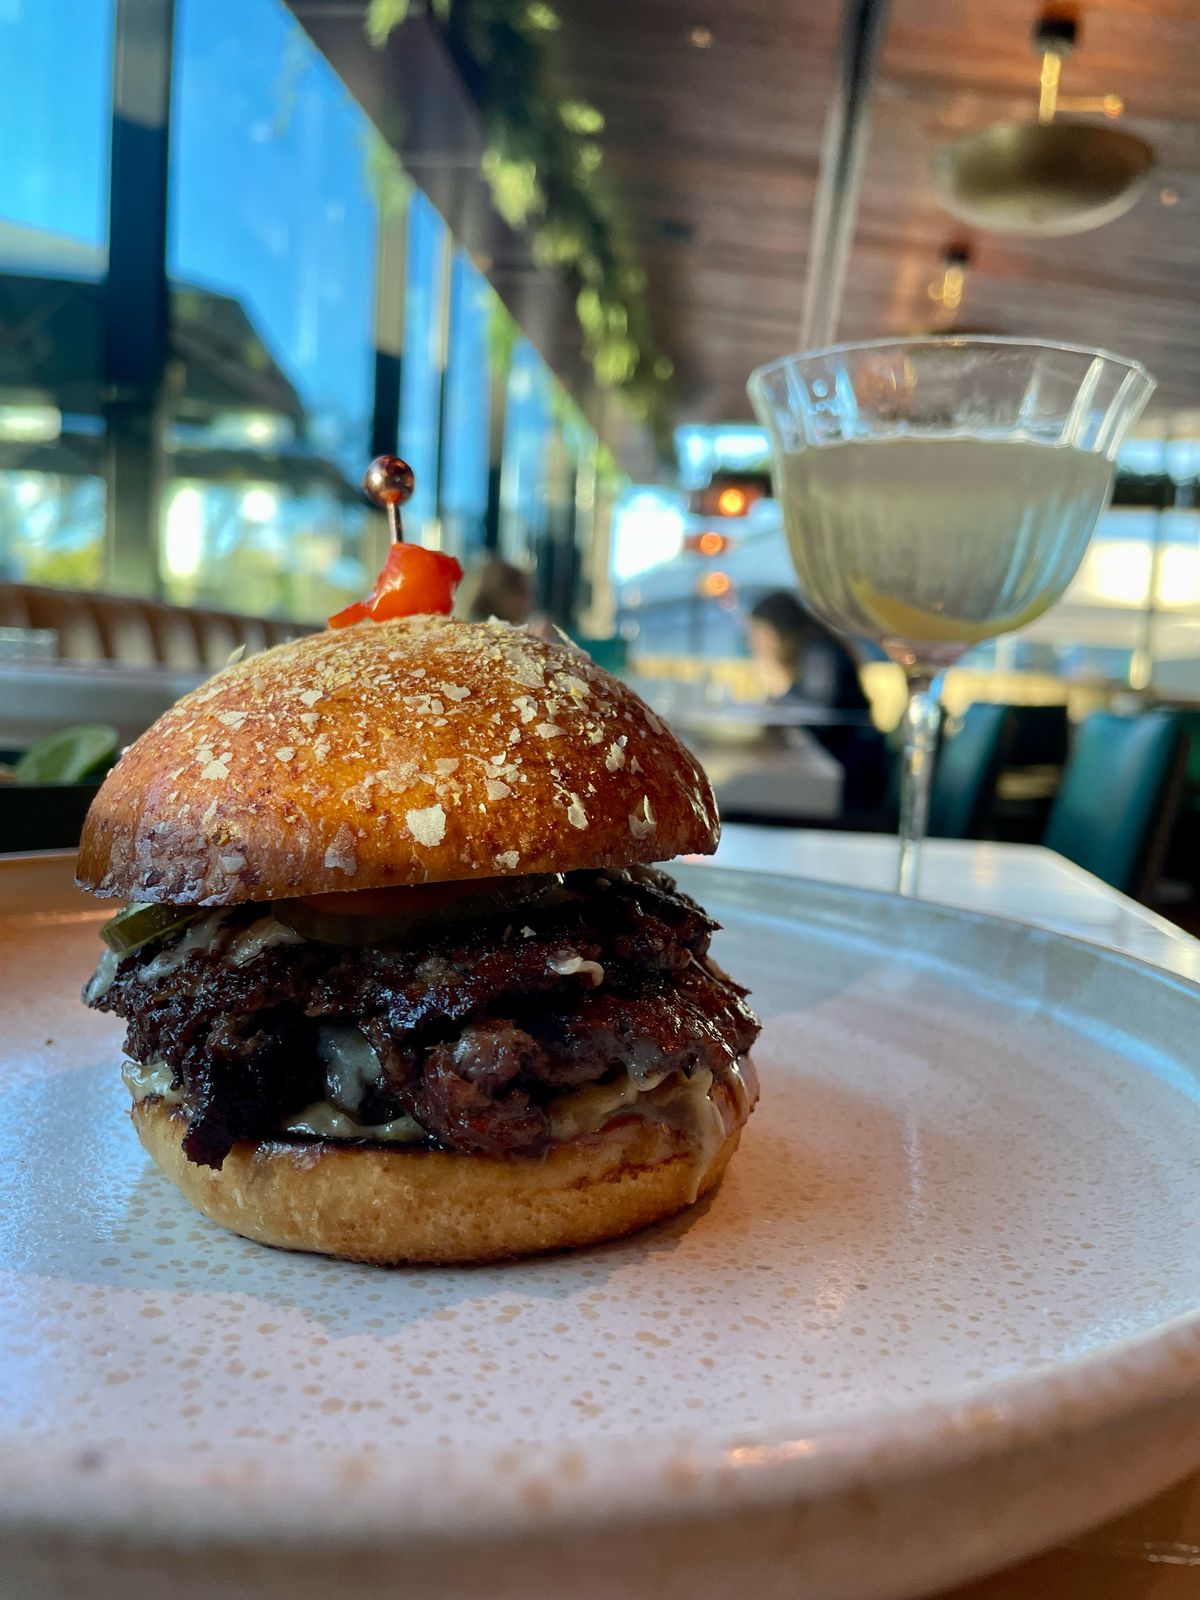 A double patty burger sits on a table with a martini glass to the right. Behind it are the brass and wood touches of a restaurant.